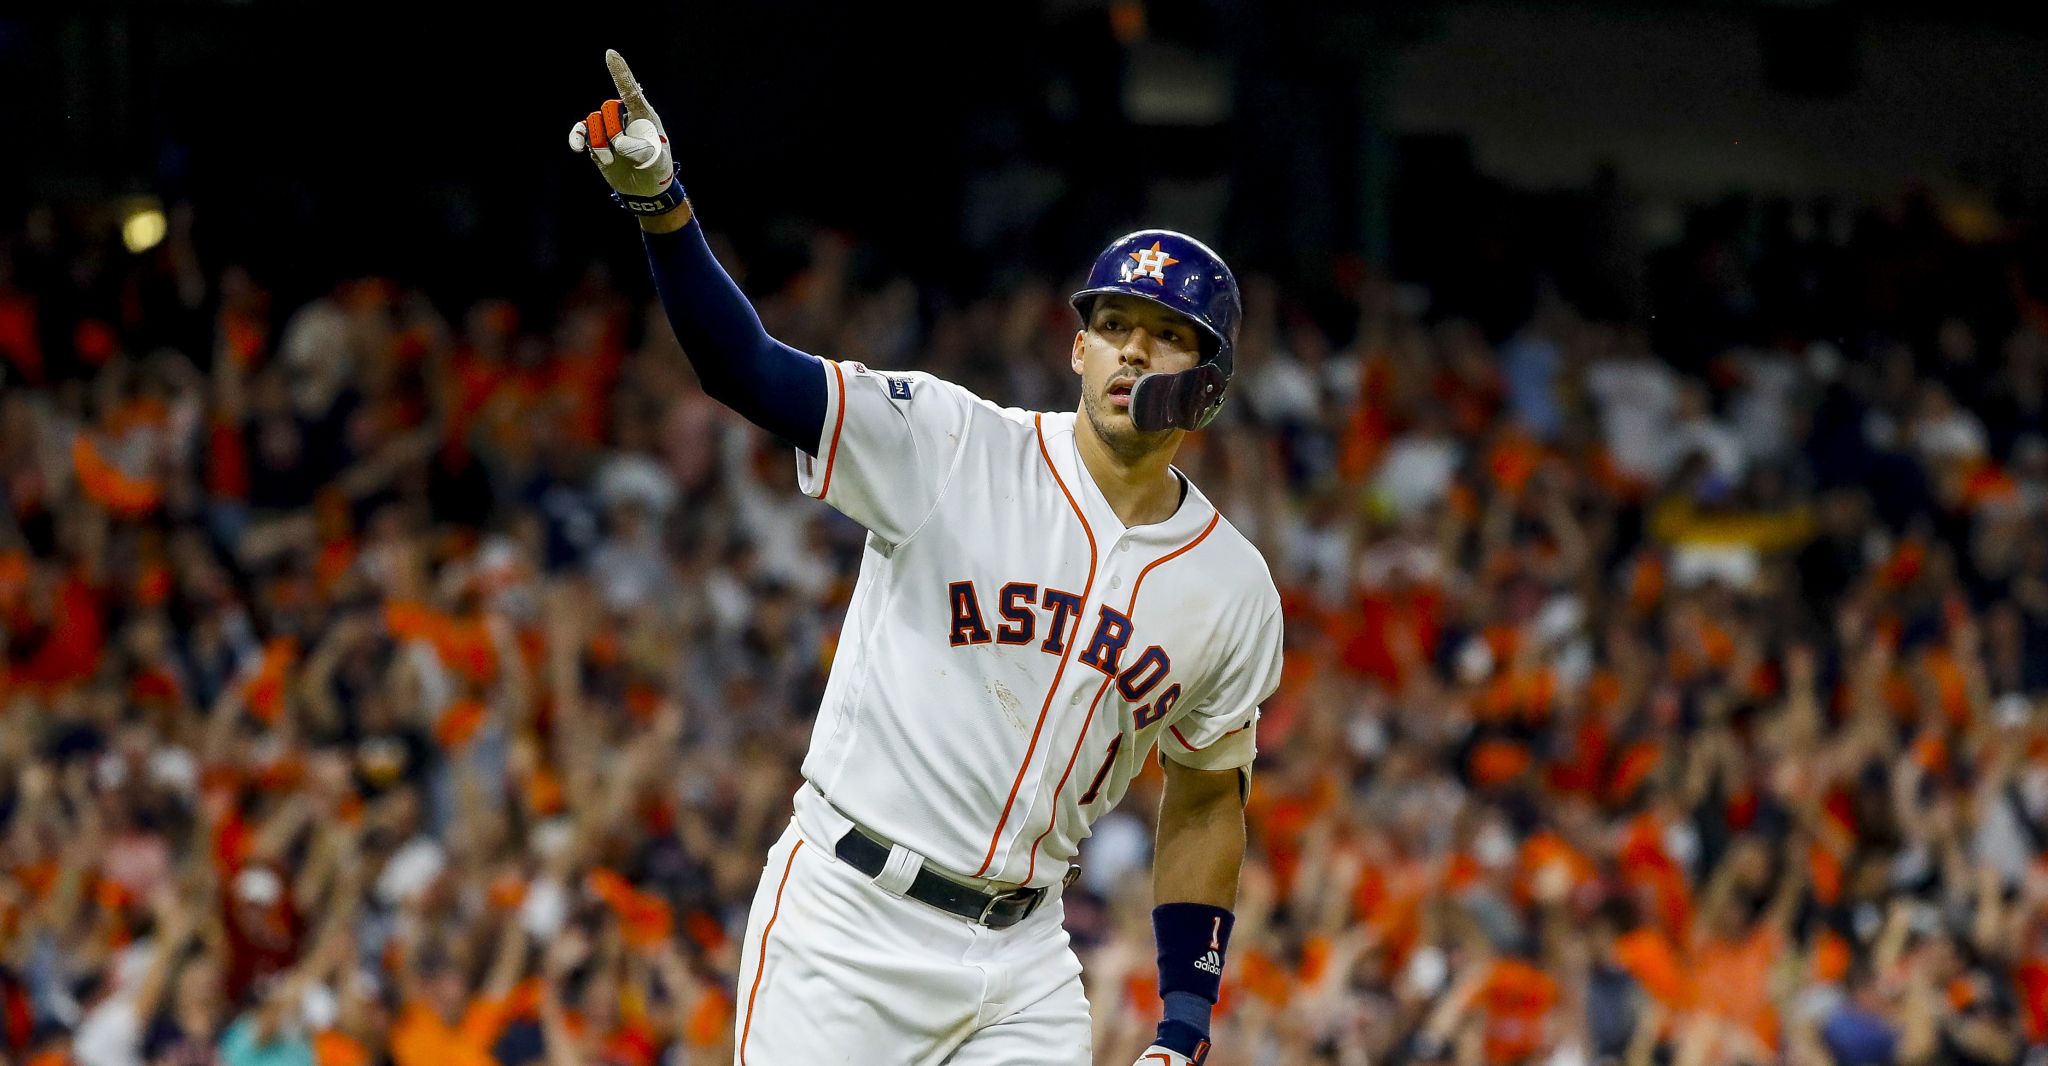 One swing and a magical finish for Astros, Carlos Correa